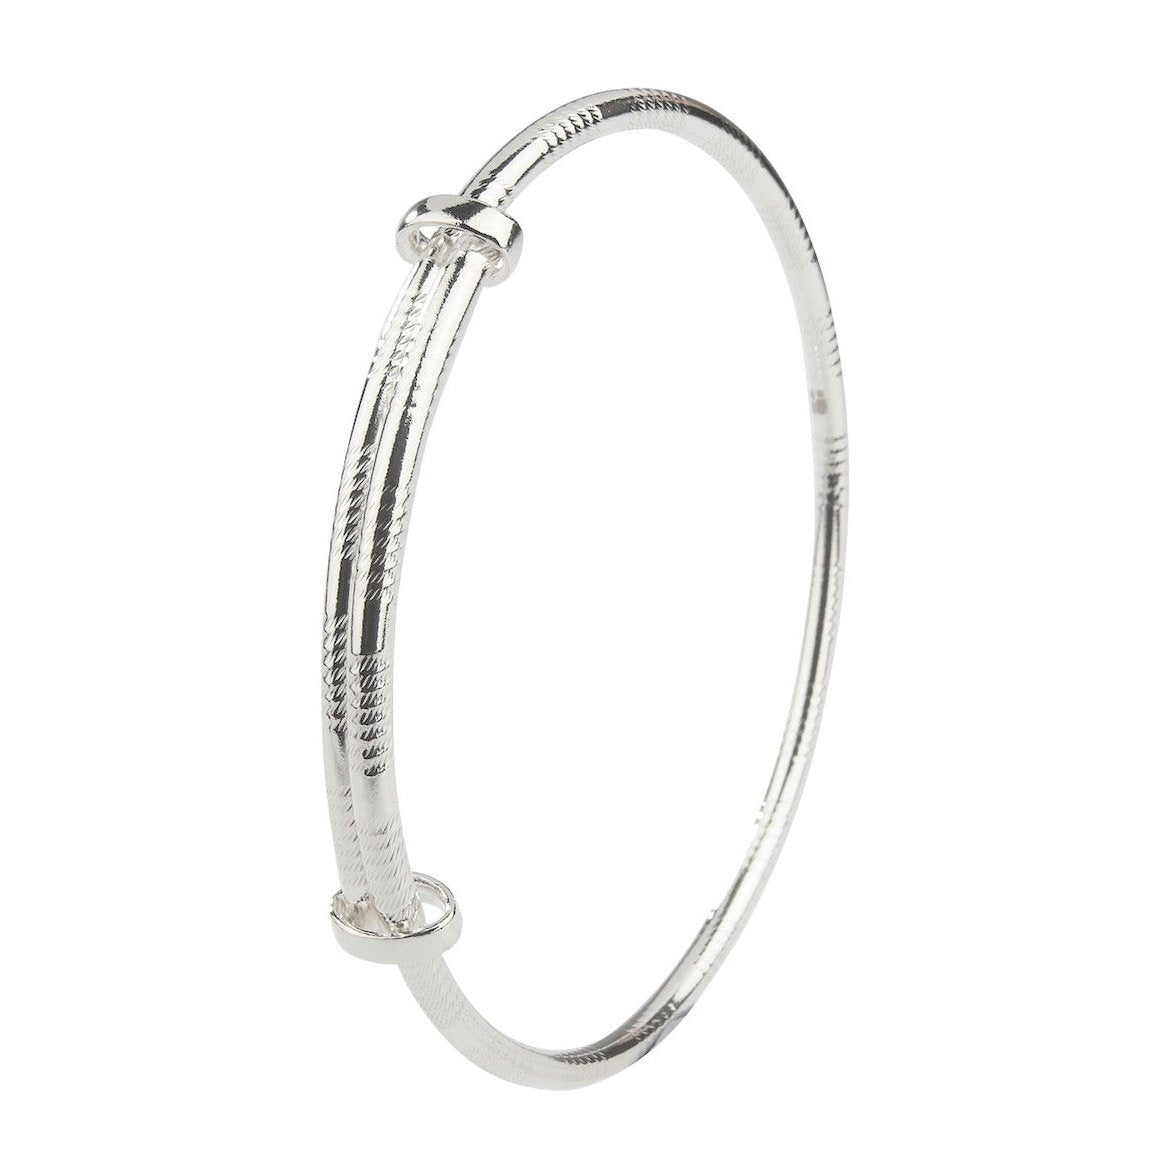 Silver patterned expanding bangle